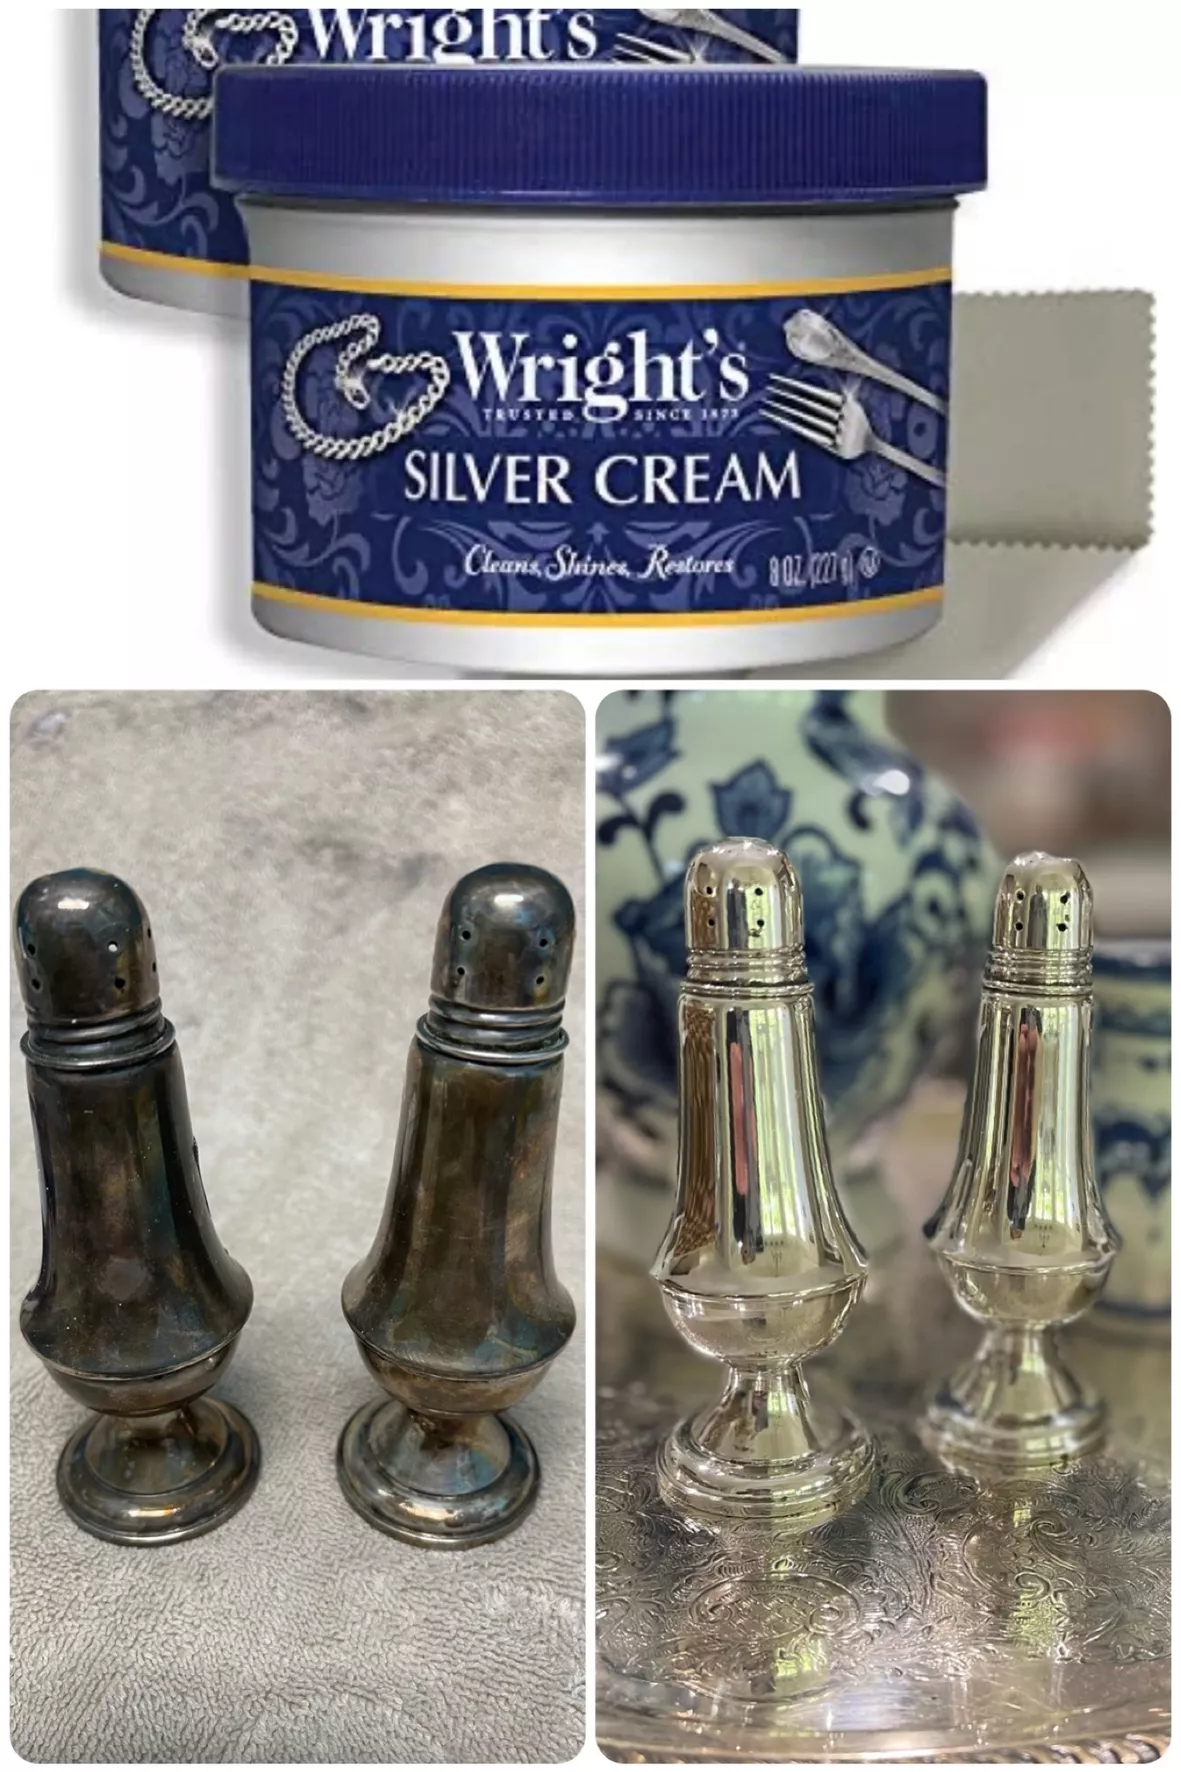 Wright's Silver Cleaner and Polish Cream - 8 Ounce - 2 Pack